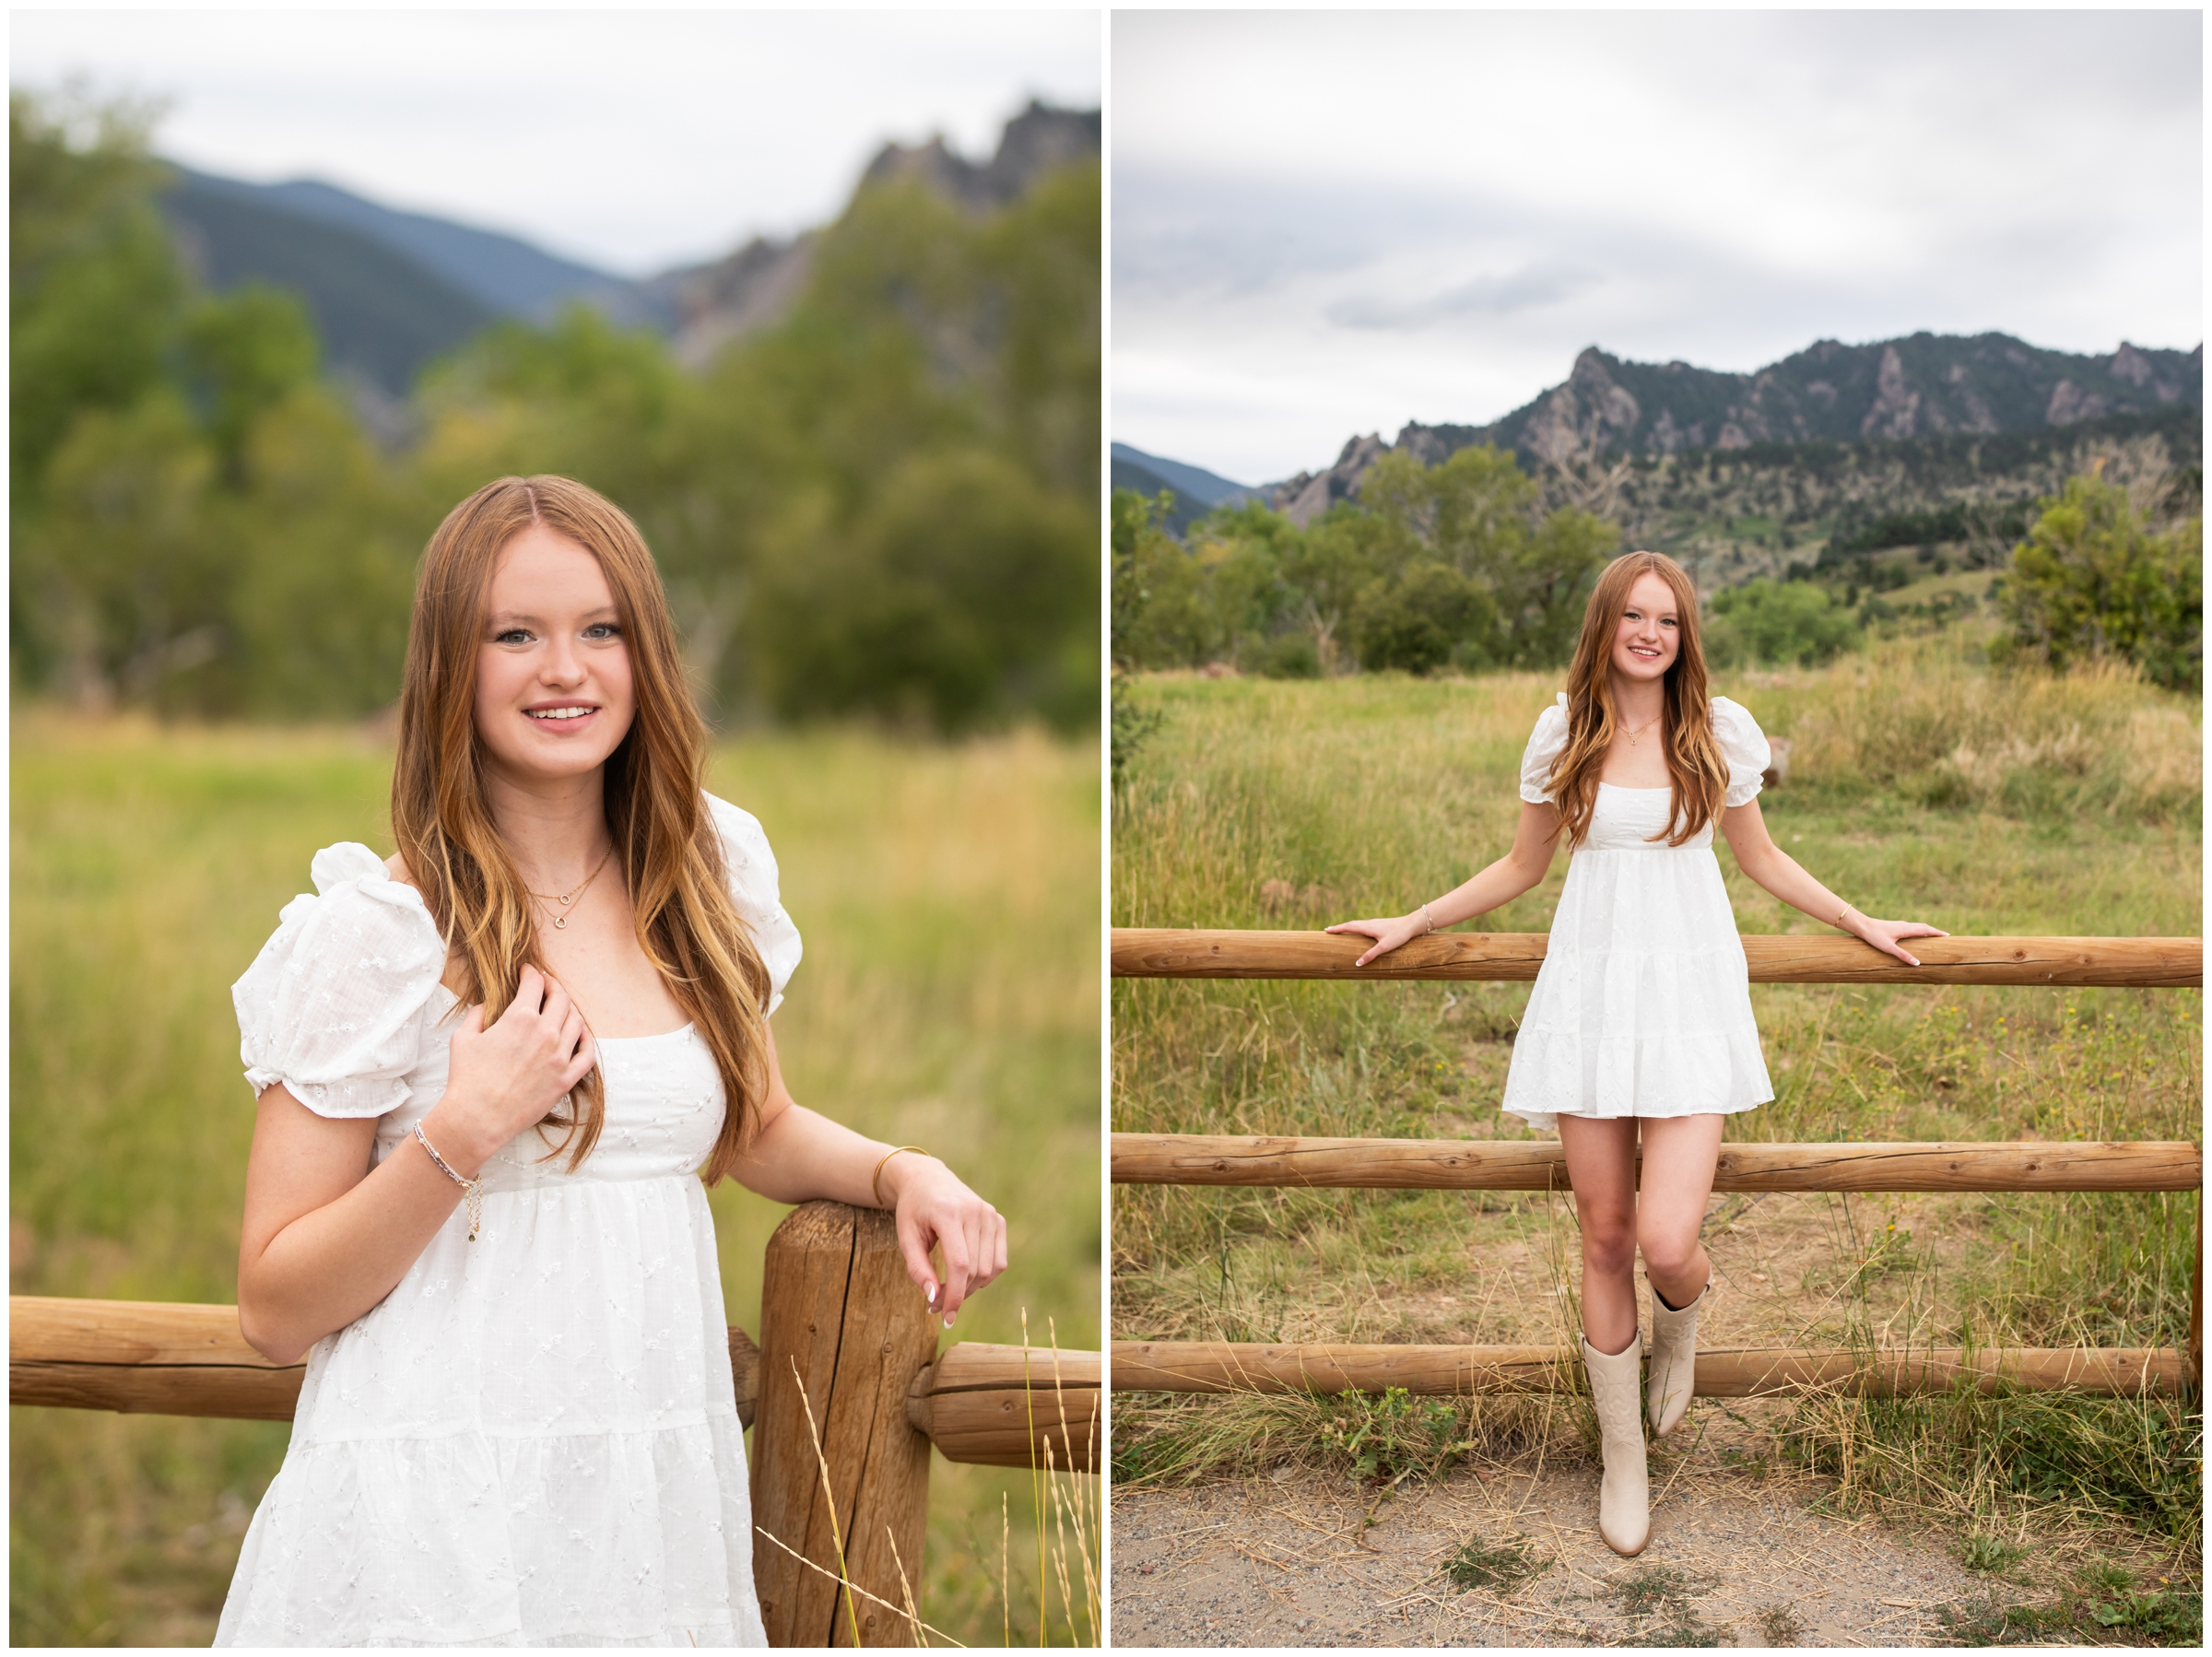 teen leaning against wooden fence with mountains in background during Prospect Ridge Academy senior photos 